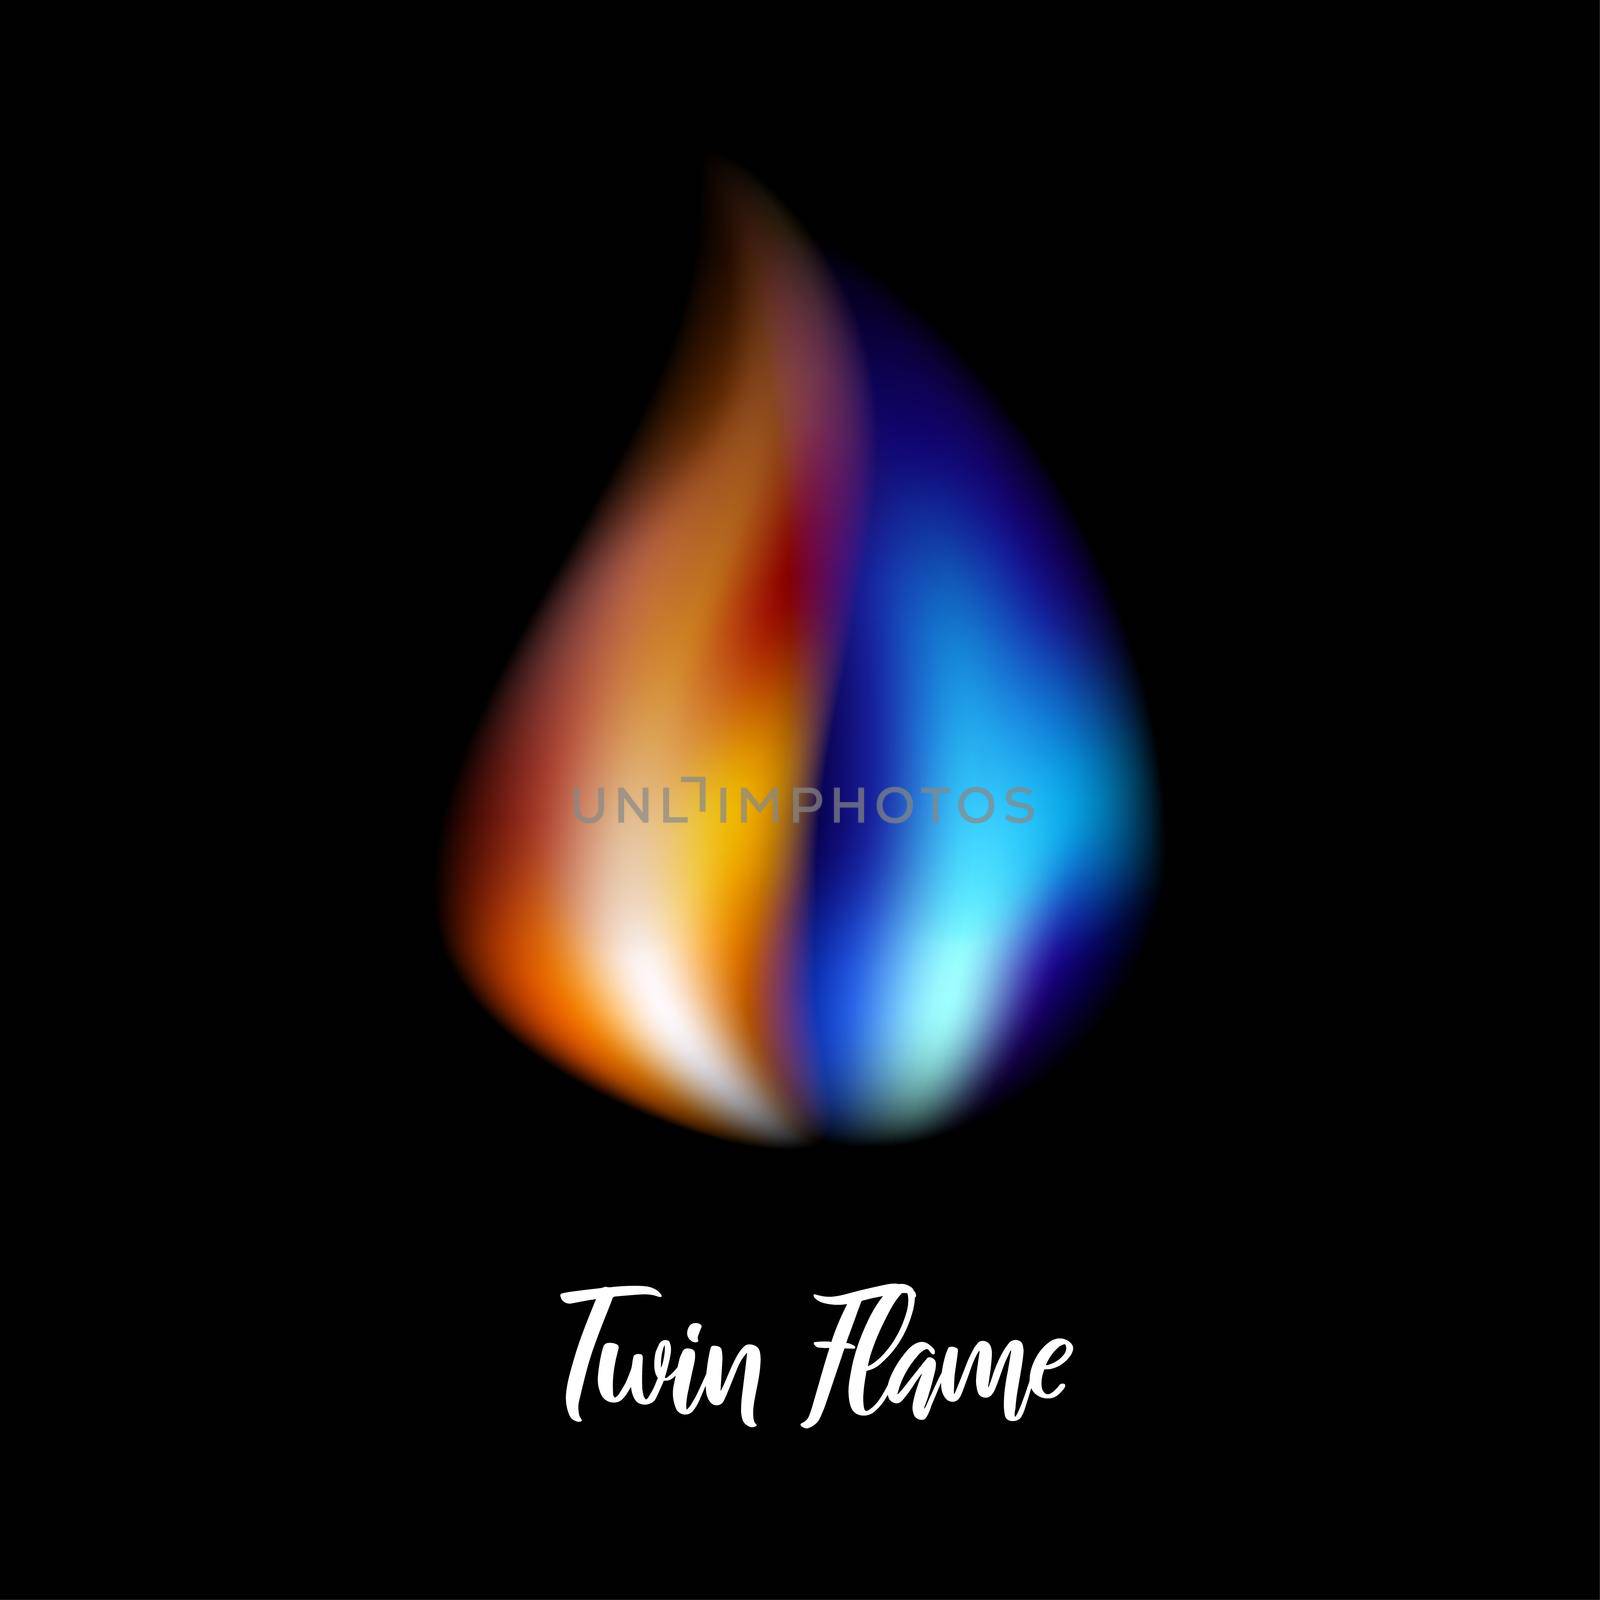 Orange and blue flame. Twin flame. illustration on black background for web sites and much more.